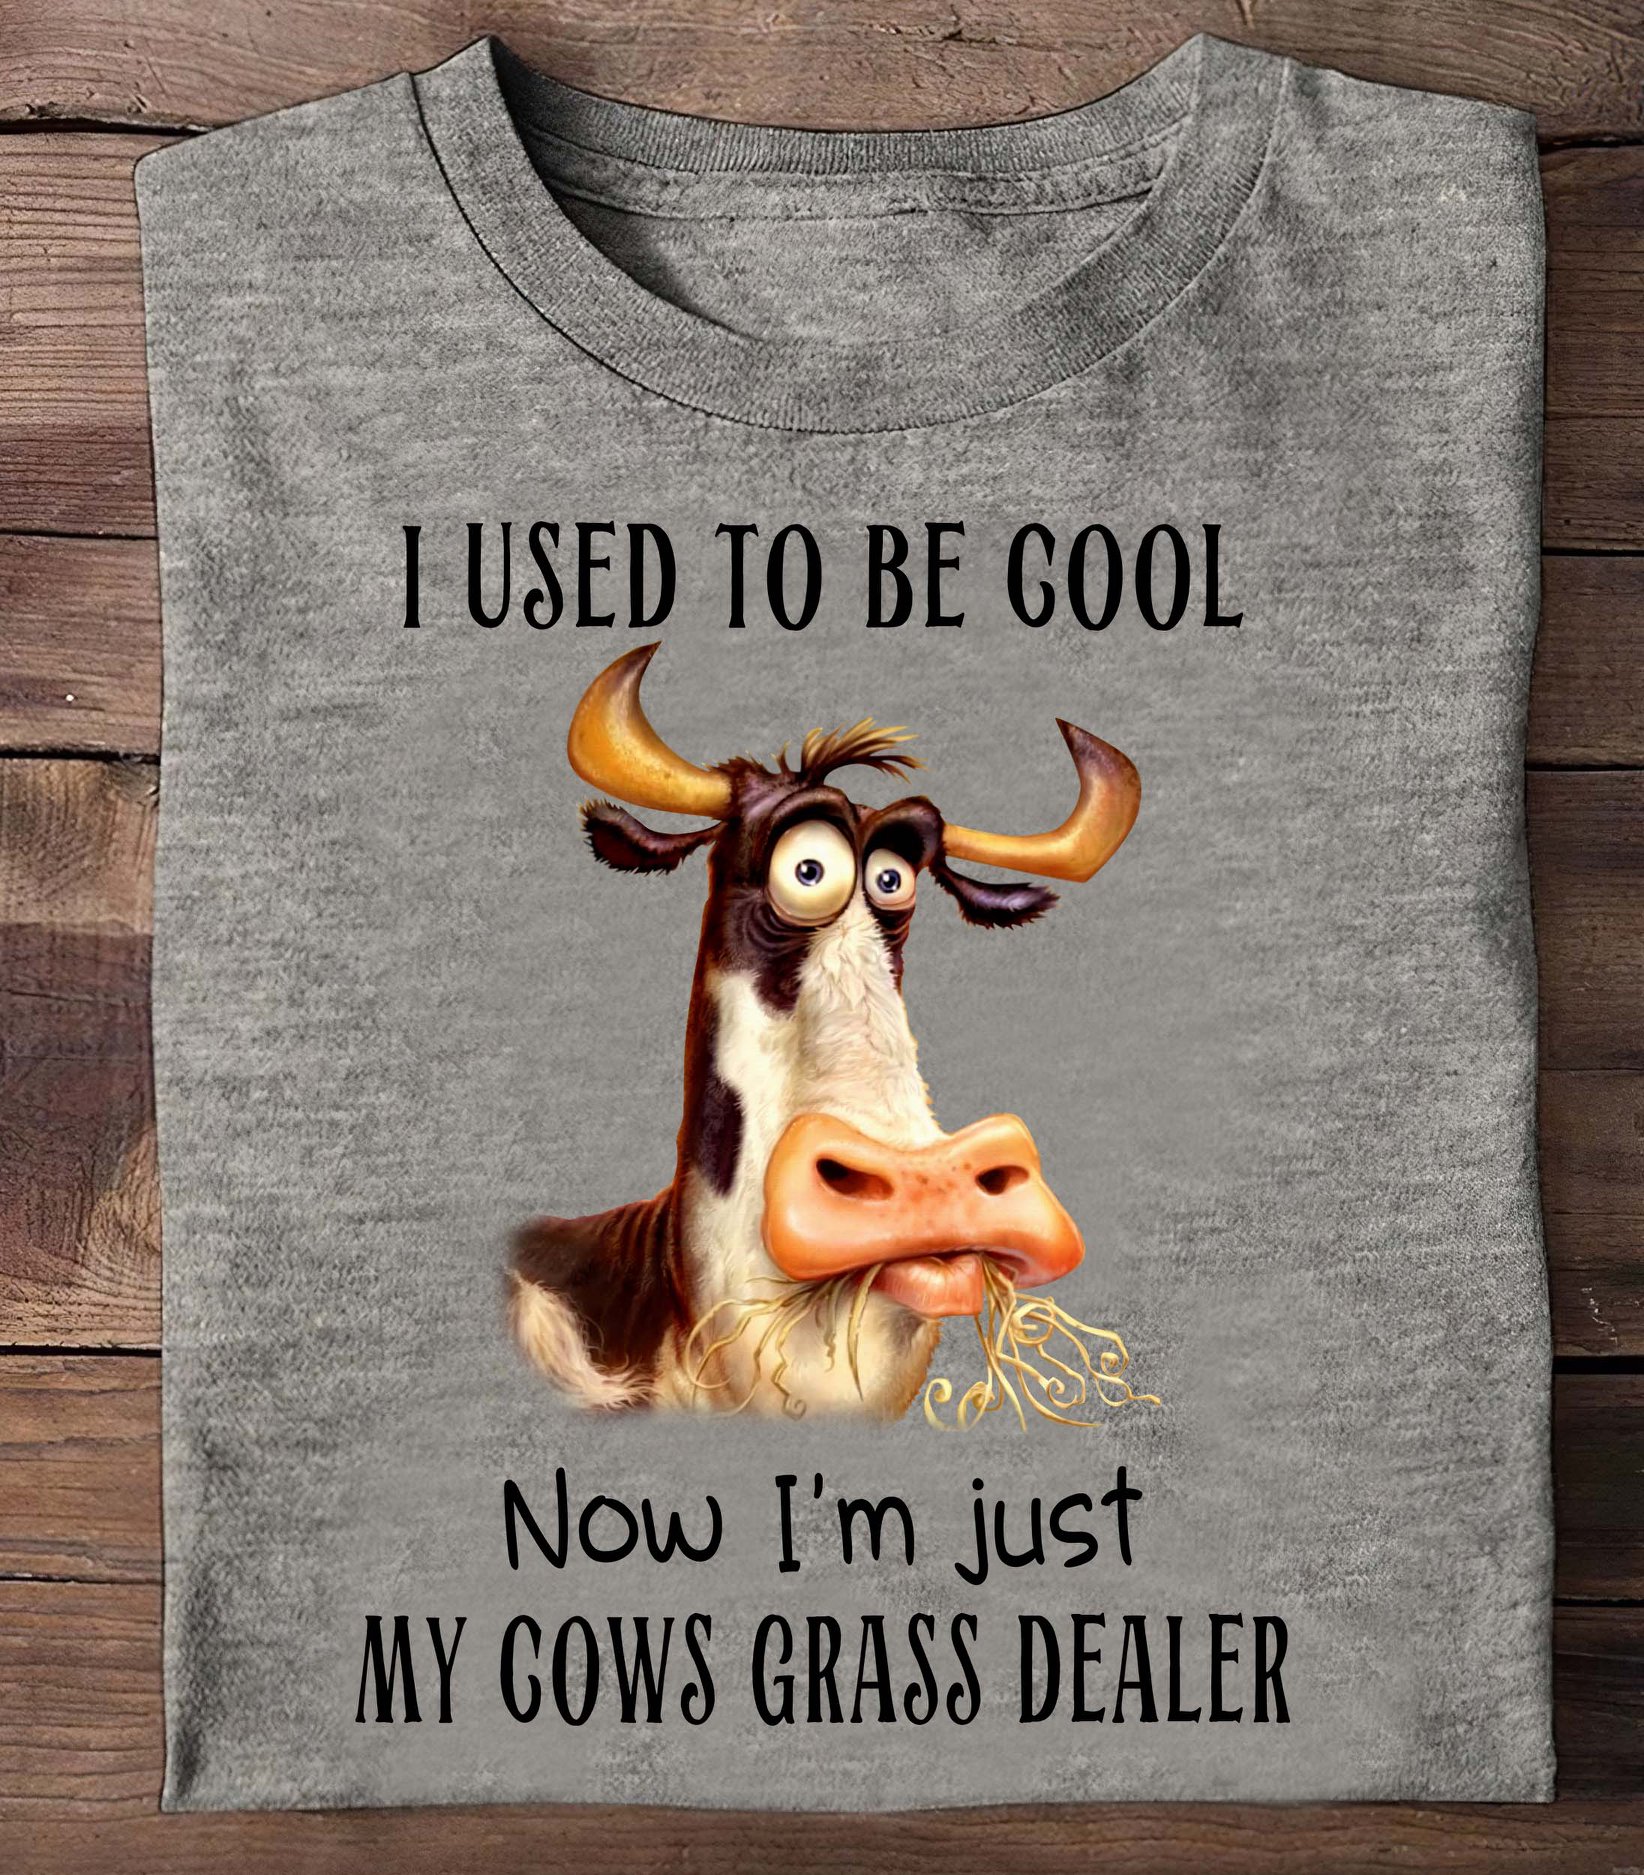 I used to be cool now I'm just my cows grass dealer - Cow lover